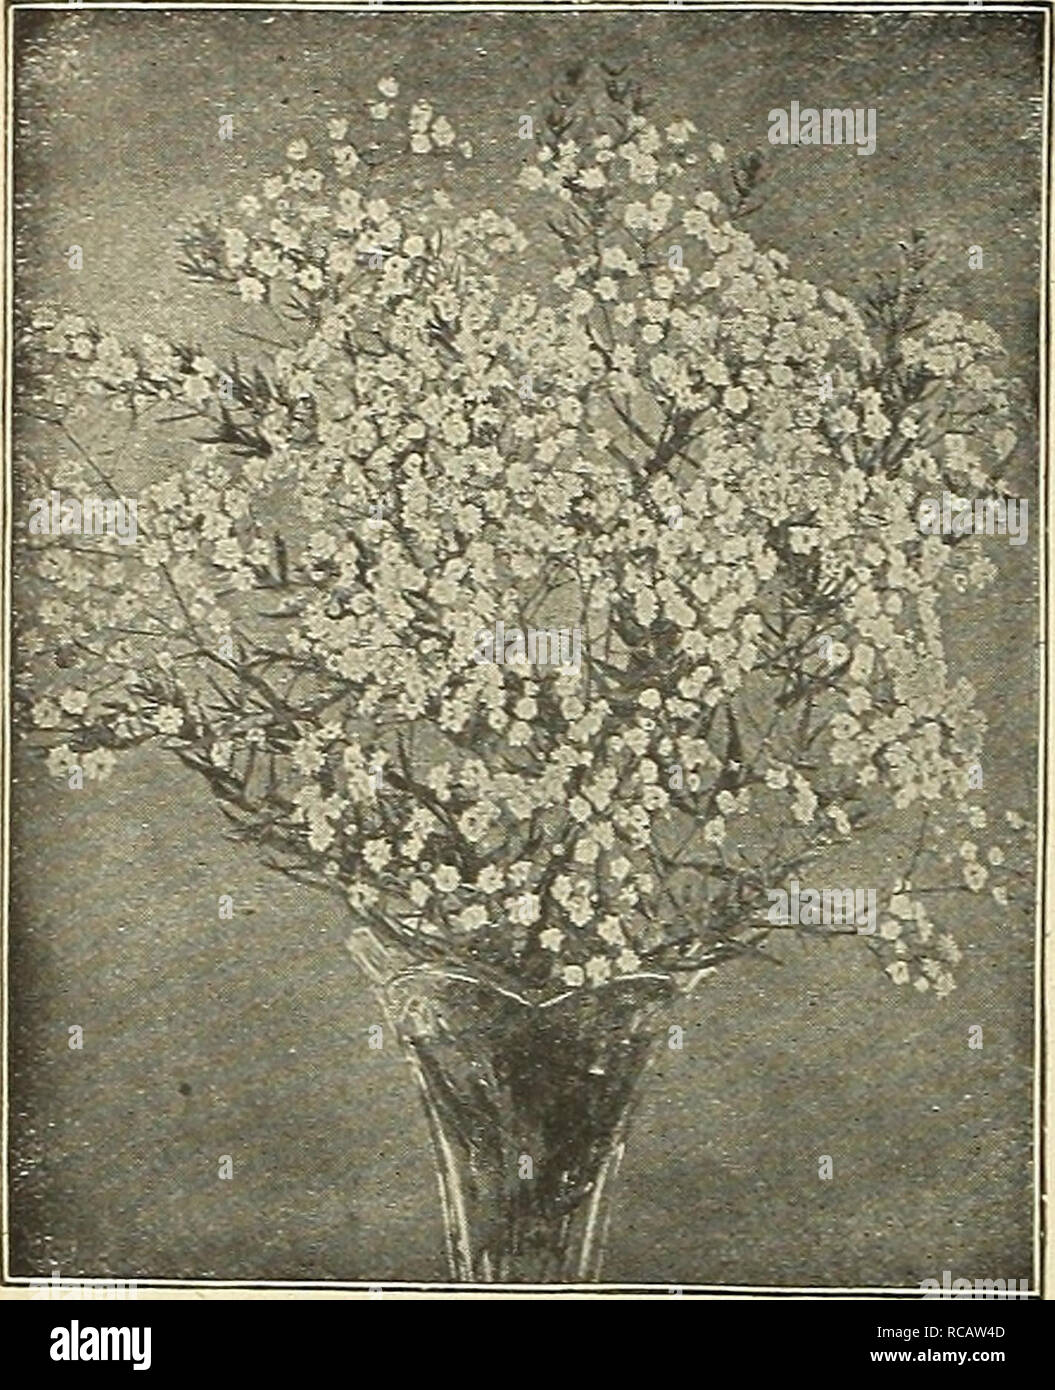 . Dreer's garden book 1916. Seeds Catalogs; Nursery stock Catalogs; Gardening Equipment and supplies Catalogs; Flowers Seeds Catalogs; Vegetables Seeds Catalogs; Fruit Seeds Catalogs. 218OllTHWADREER MADELPHIA'lAiSr.HARDY PERENHIAL PLANTS- llfl. Gypsophila Paniculata Fl. Pl. GYPSOPHILA. (Baby's Breath.) The Gypsophilas will thrive in any soil in a sunny position, and on account of their grace- fully arranged large panicles of minute flowers should be inevery garden. Acutifolia. A strong-growing species with large 2 feet high panicles of pure white small flowers in Tuly. Gypsophila Cerastioides Stock Photo